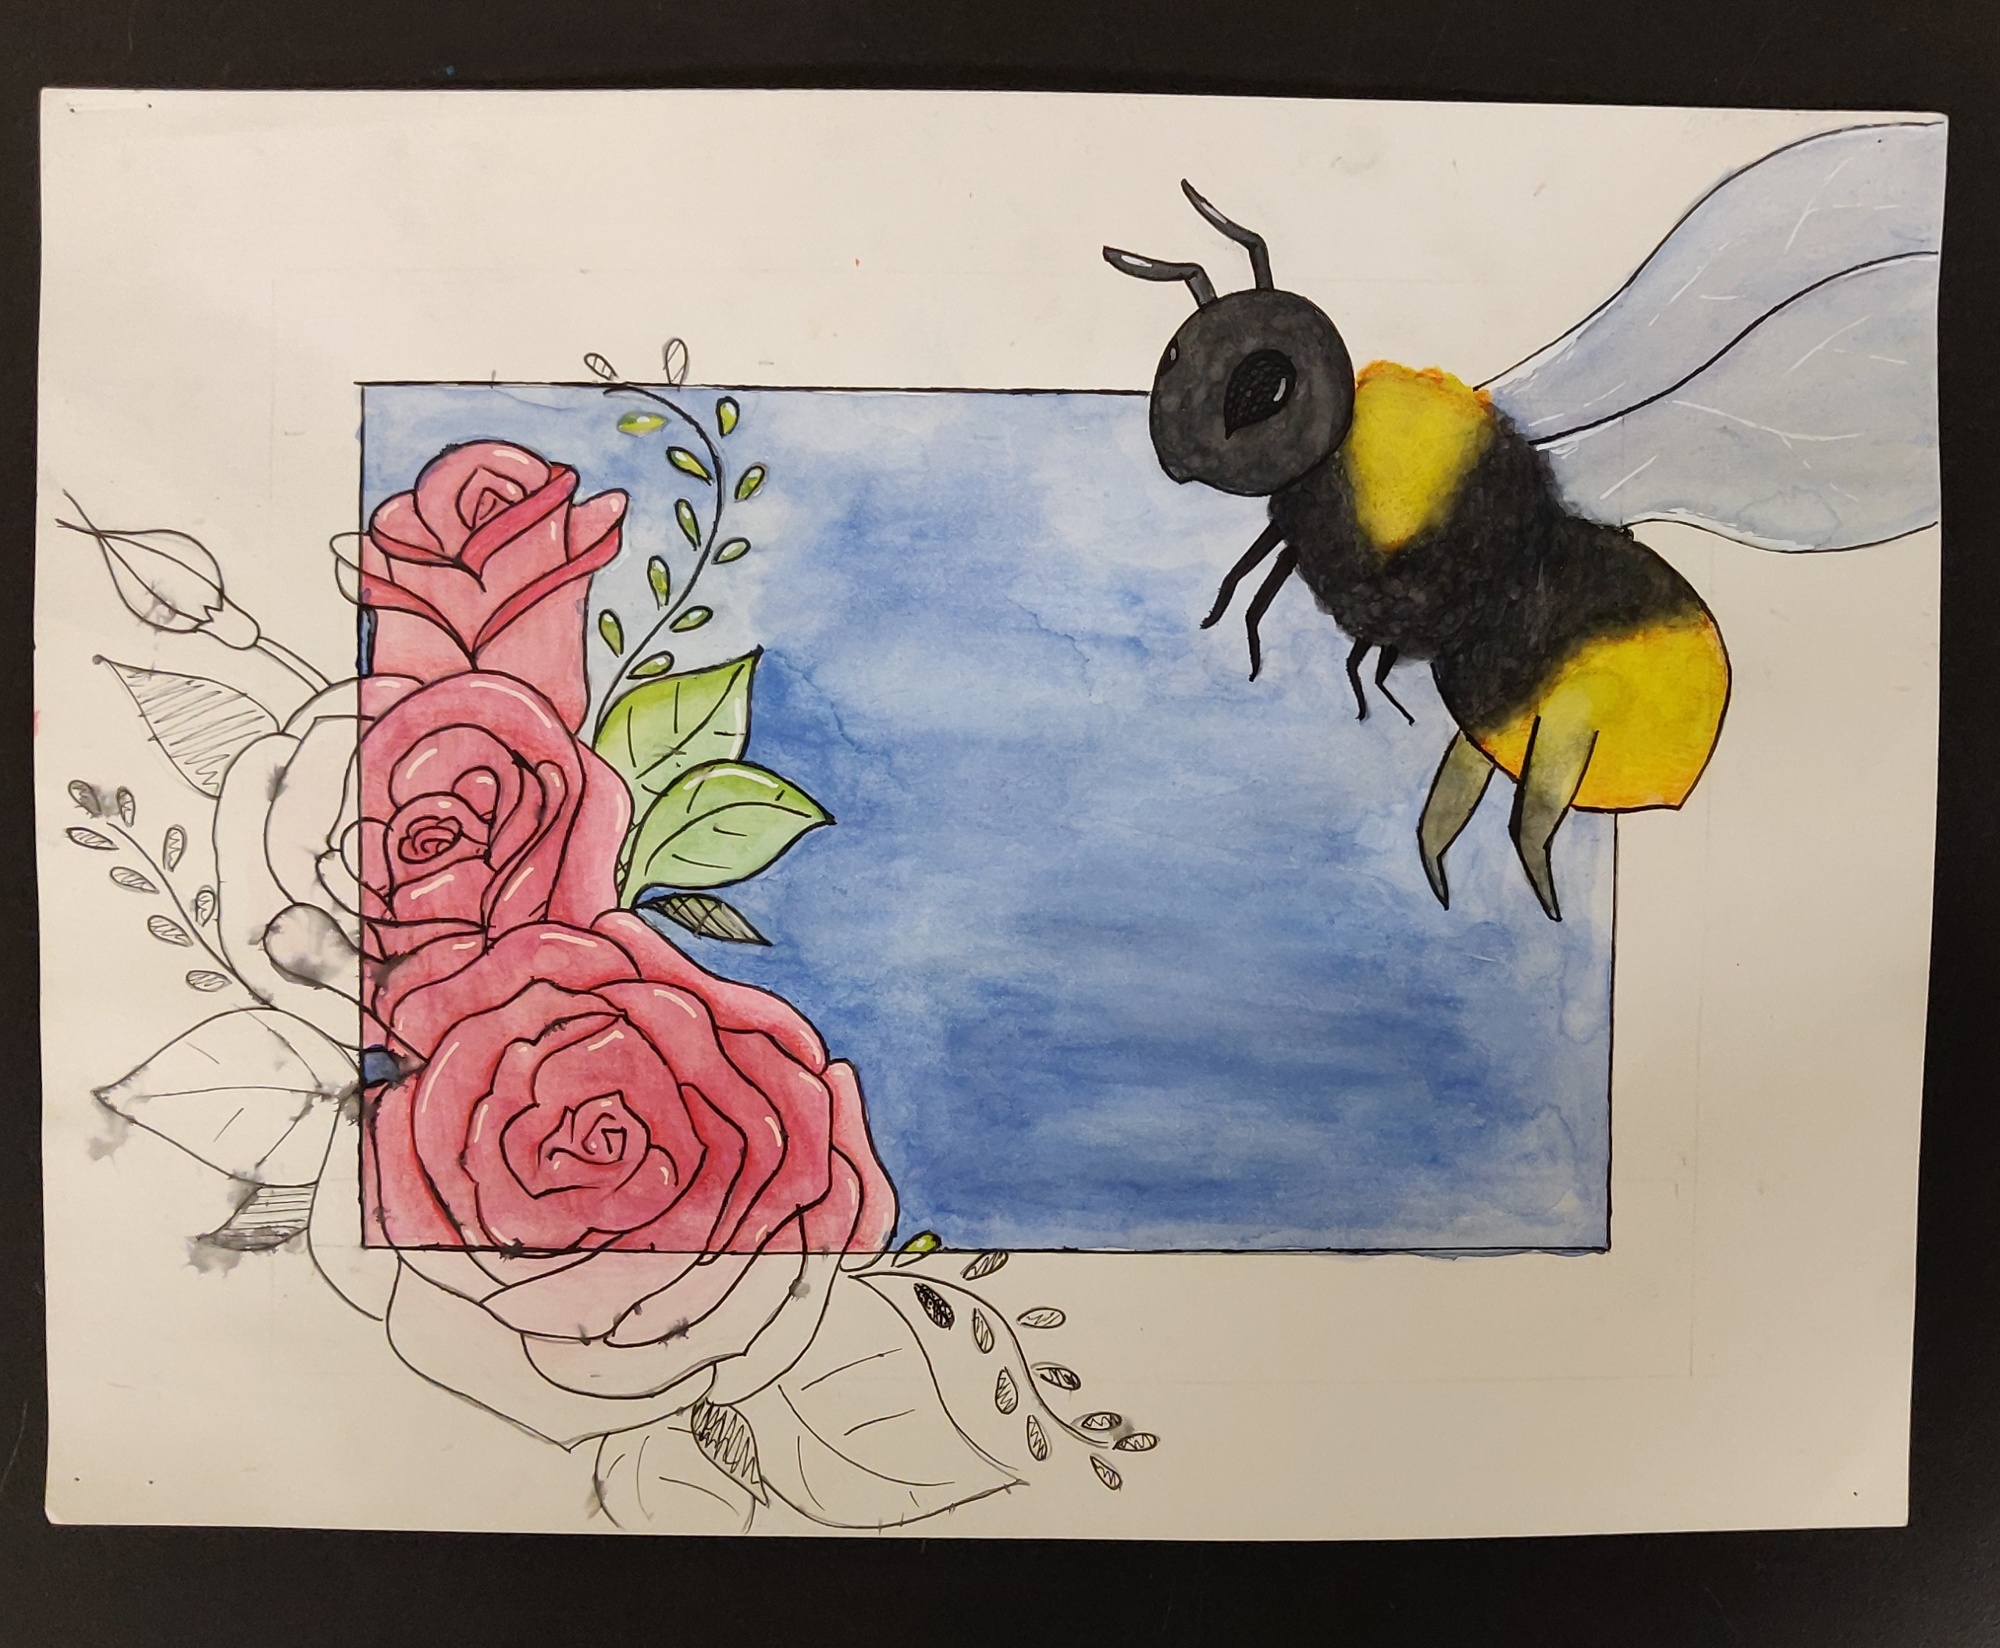 “Bee and Rose” by Audrey Brown, eighth grader at Southwestern Middle